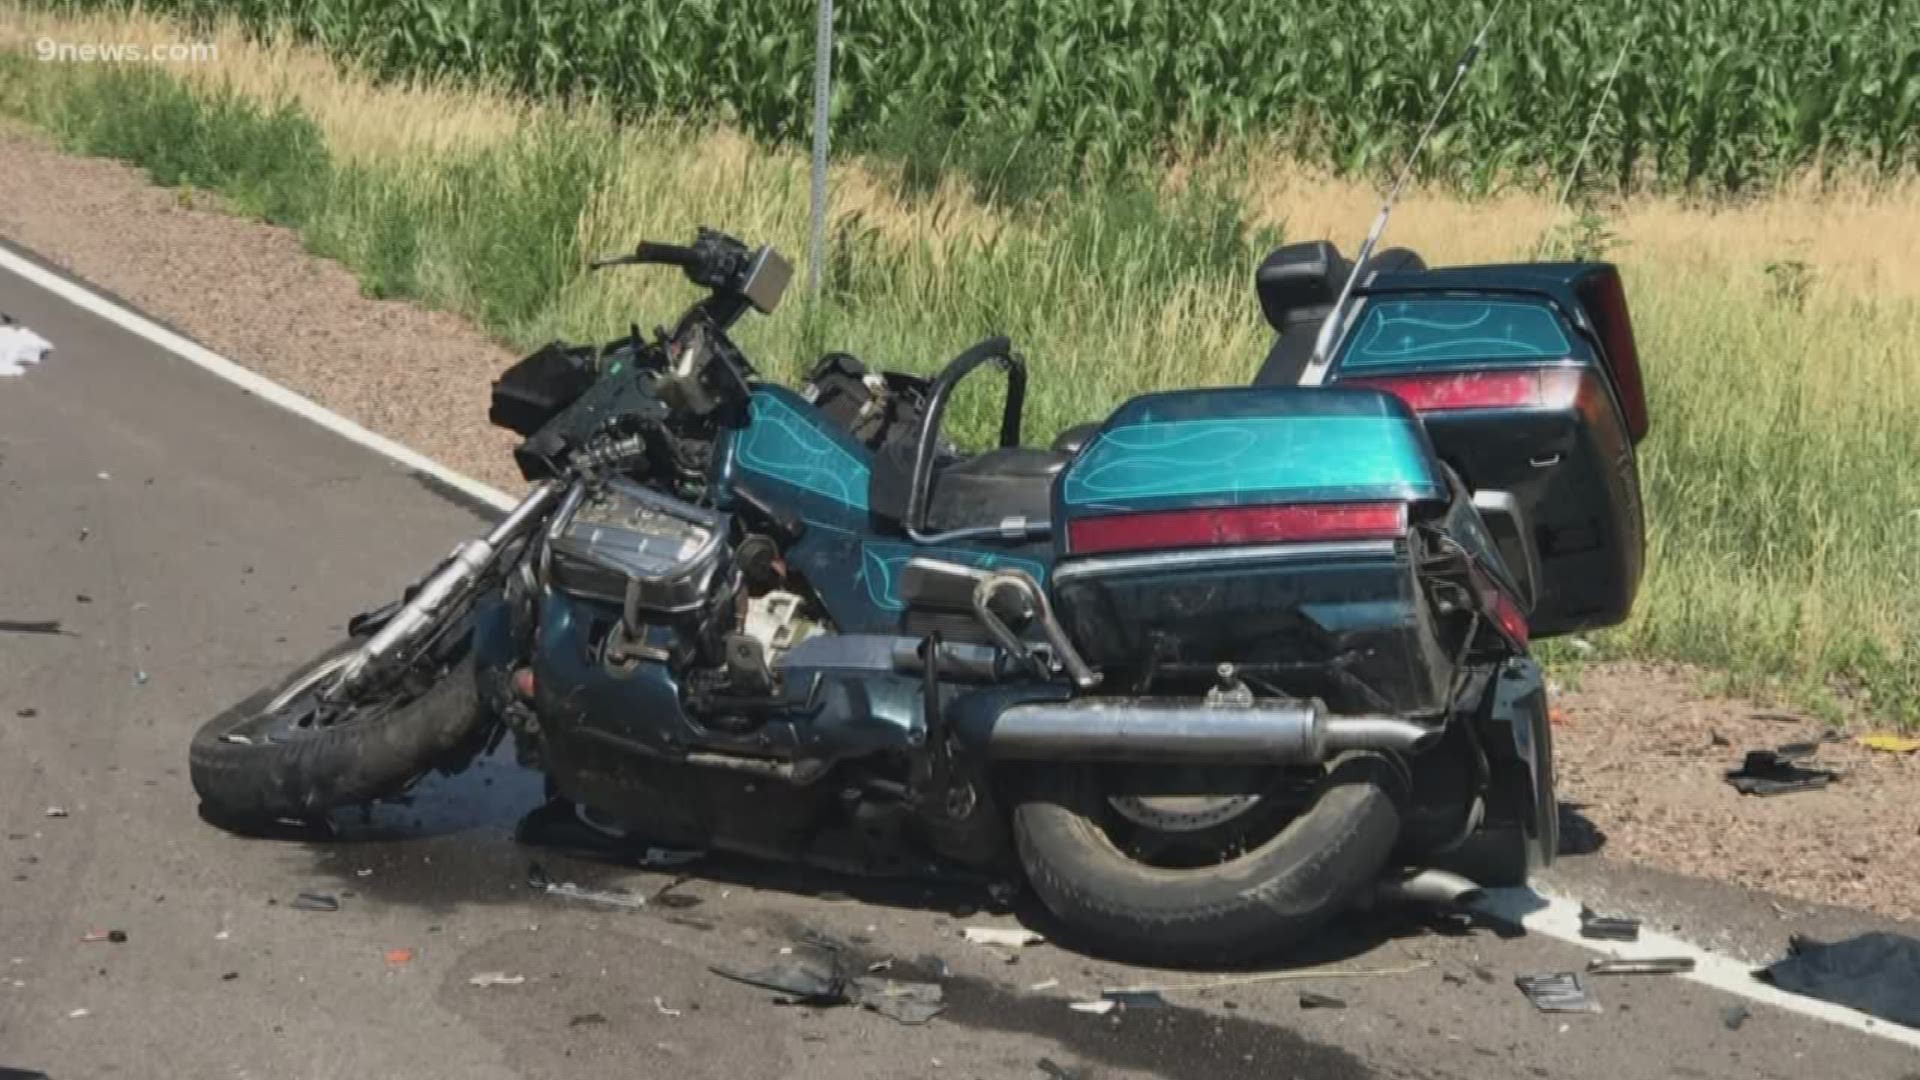 The collision happened Tuesday morning near DIA in Adams County.